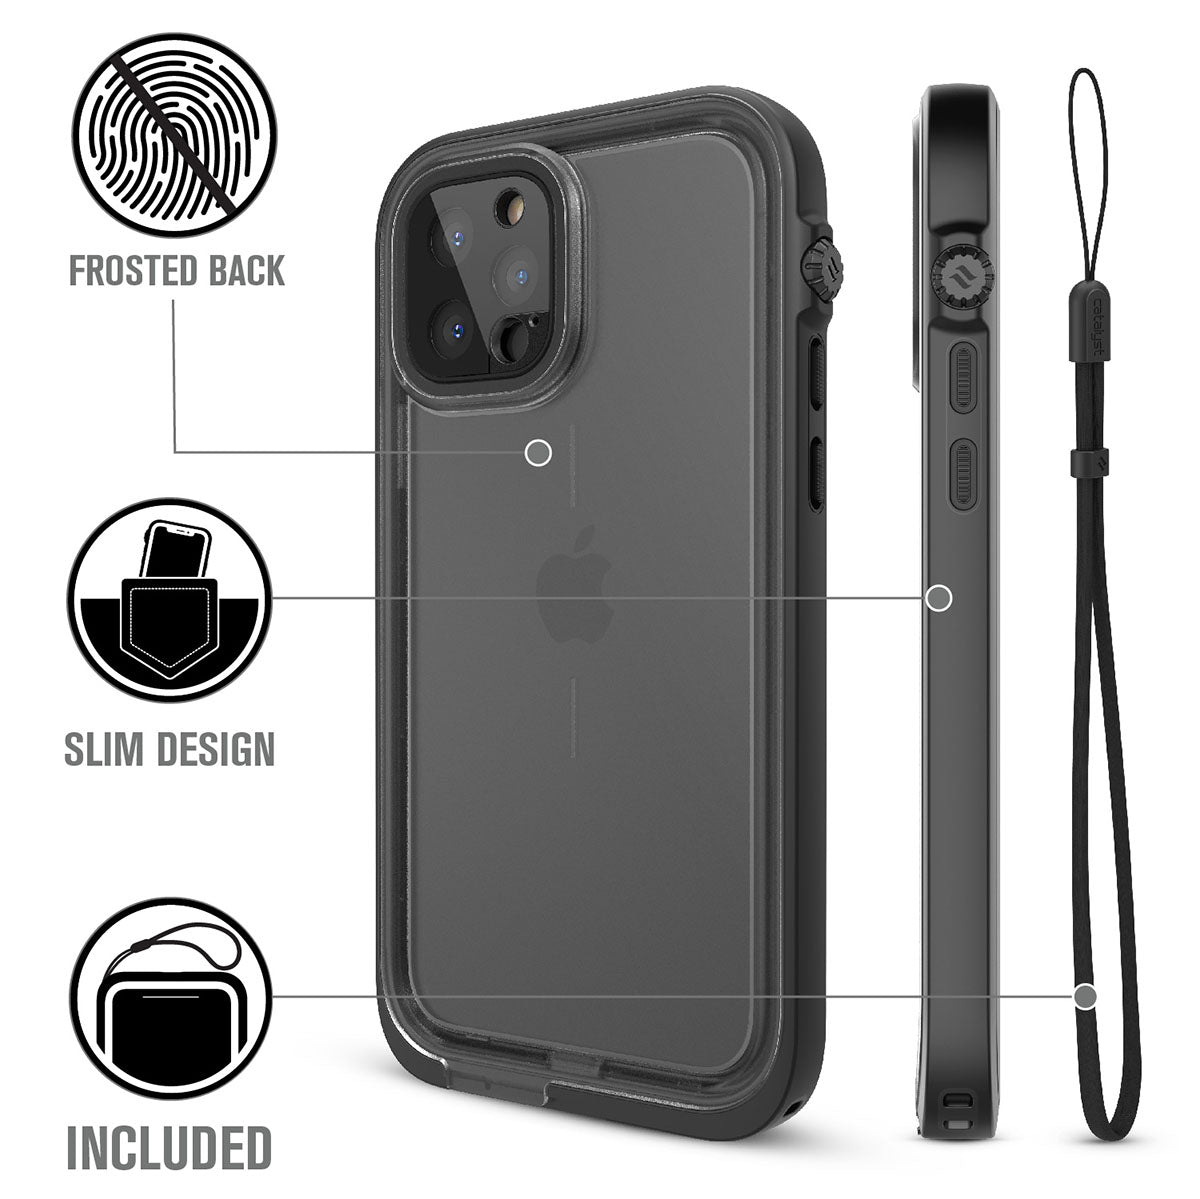 Catalyst iPhone 12 waterproof case total protection drop proof water proof back case with lanyard Text reads frosted back slim design slim design included